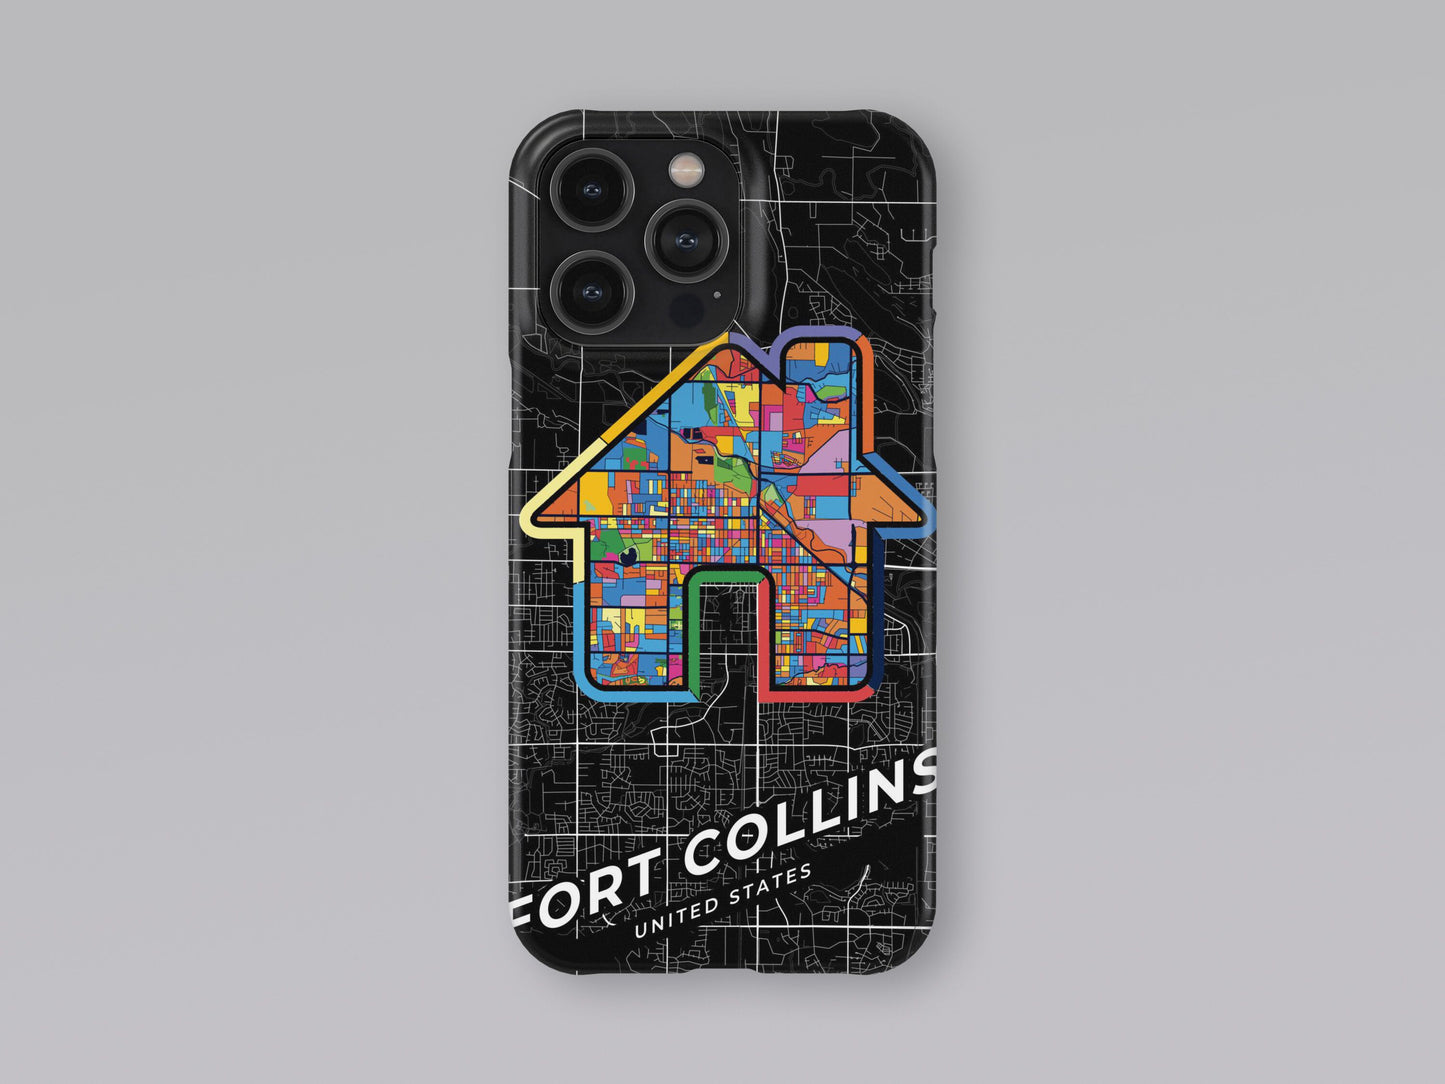 Fort Collins Colorado slim phone case with colorful icon. Birthday, wedding or housewarming gift. Couple match cases. 3